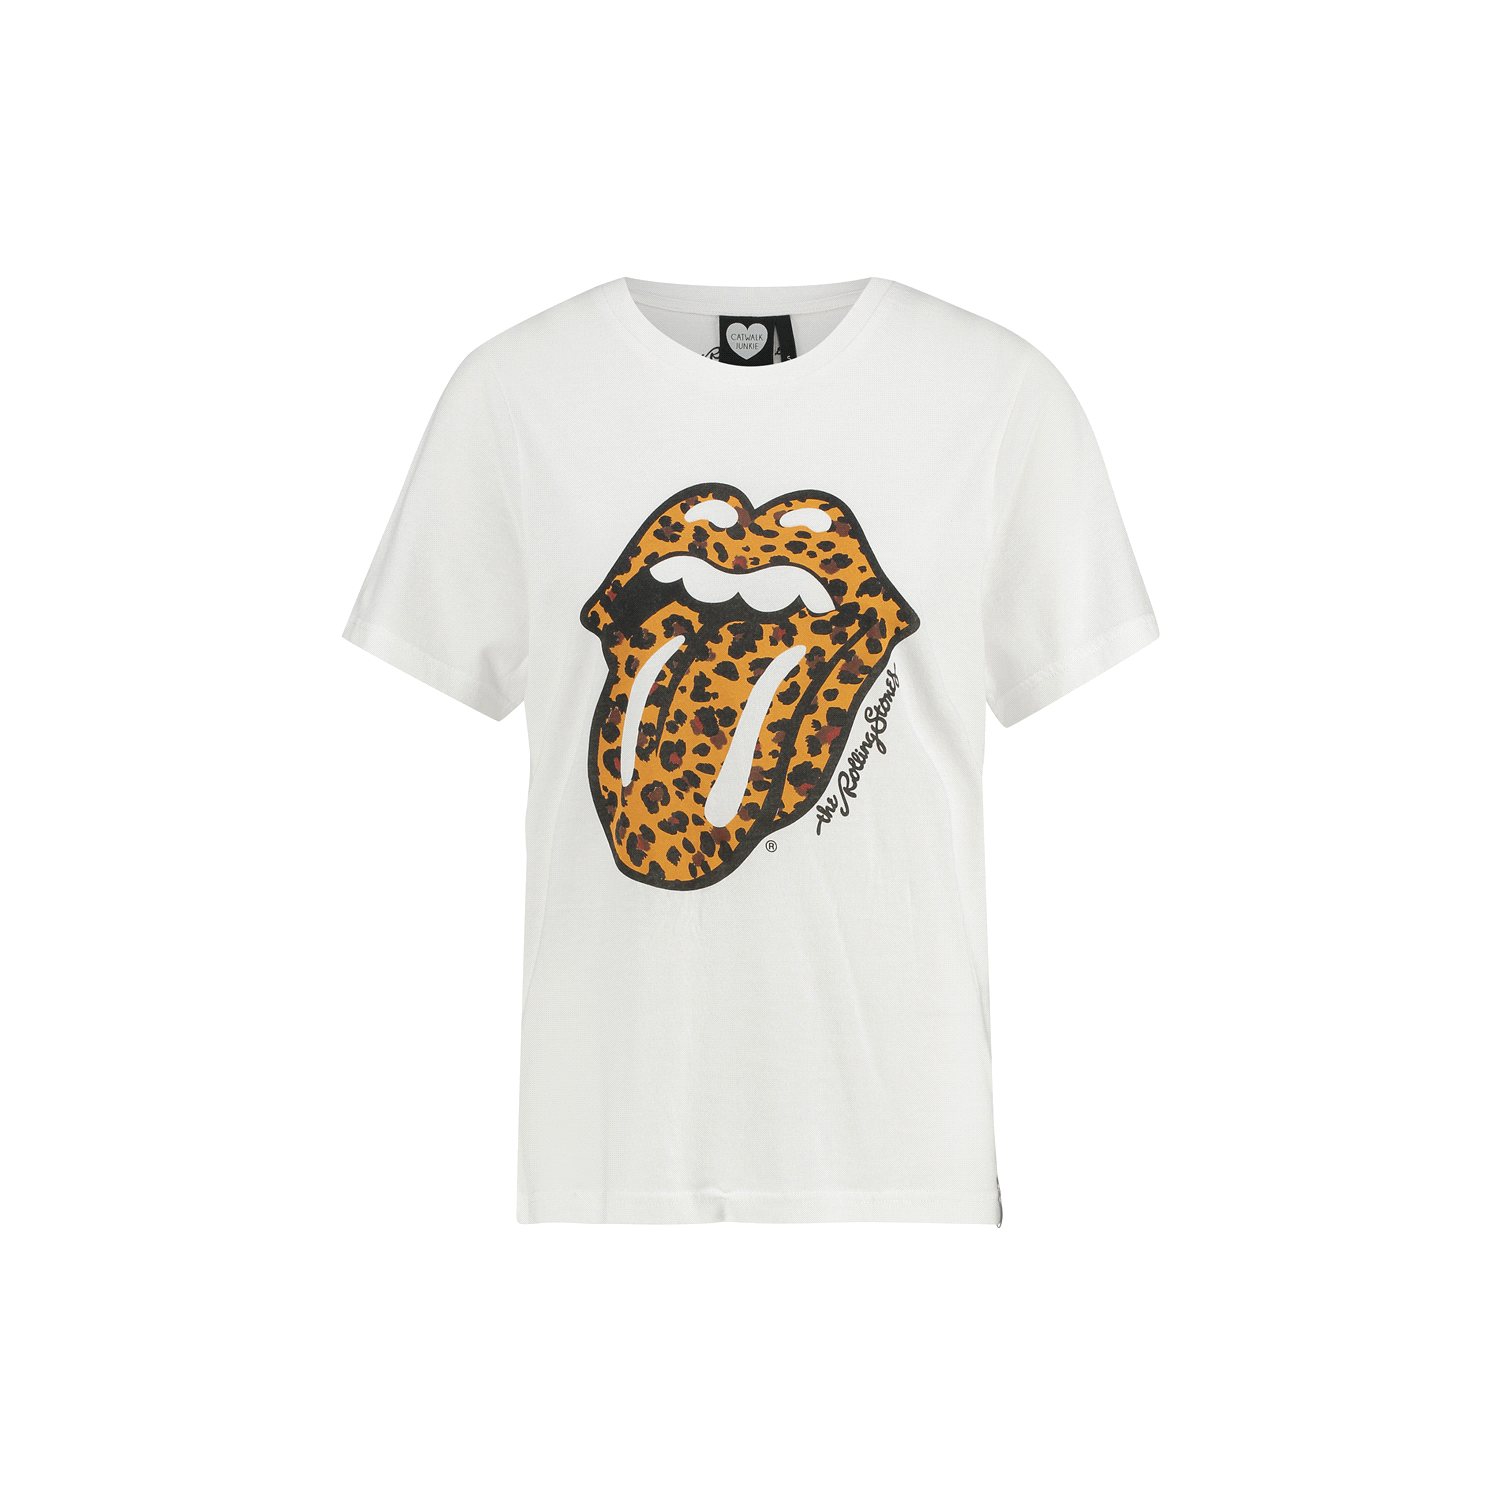 Catwalk Junkie ts rolling stones chee off white